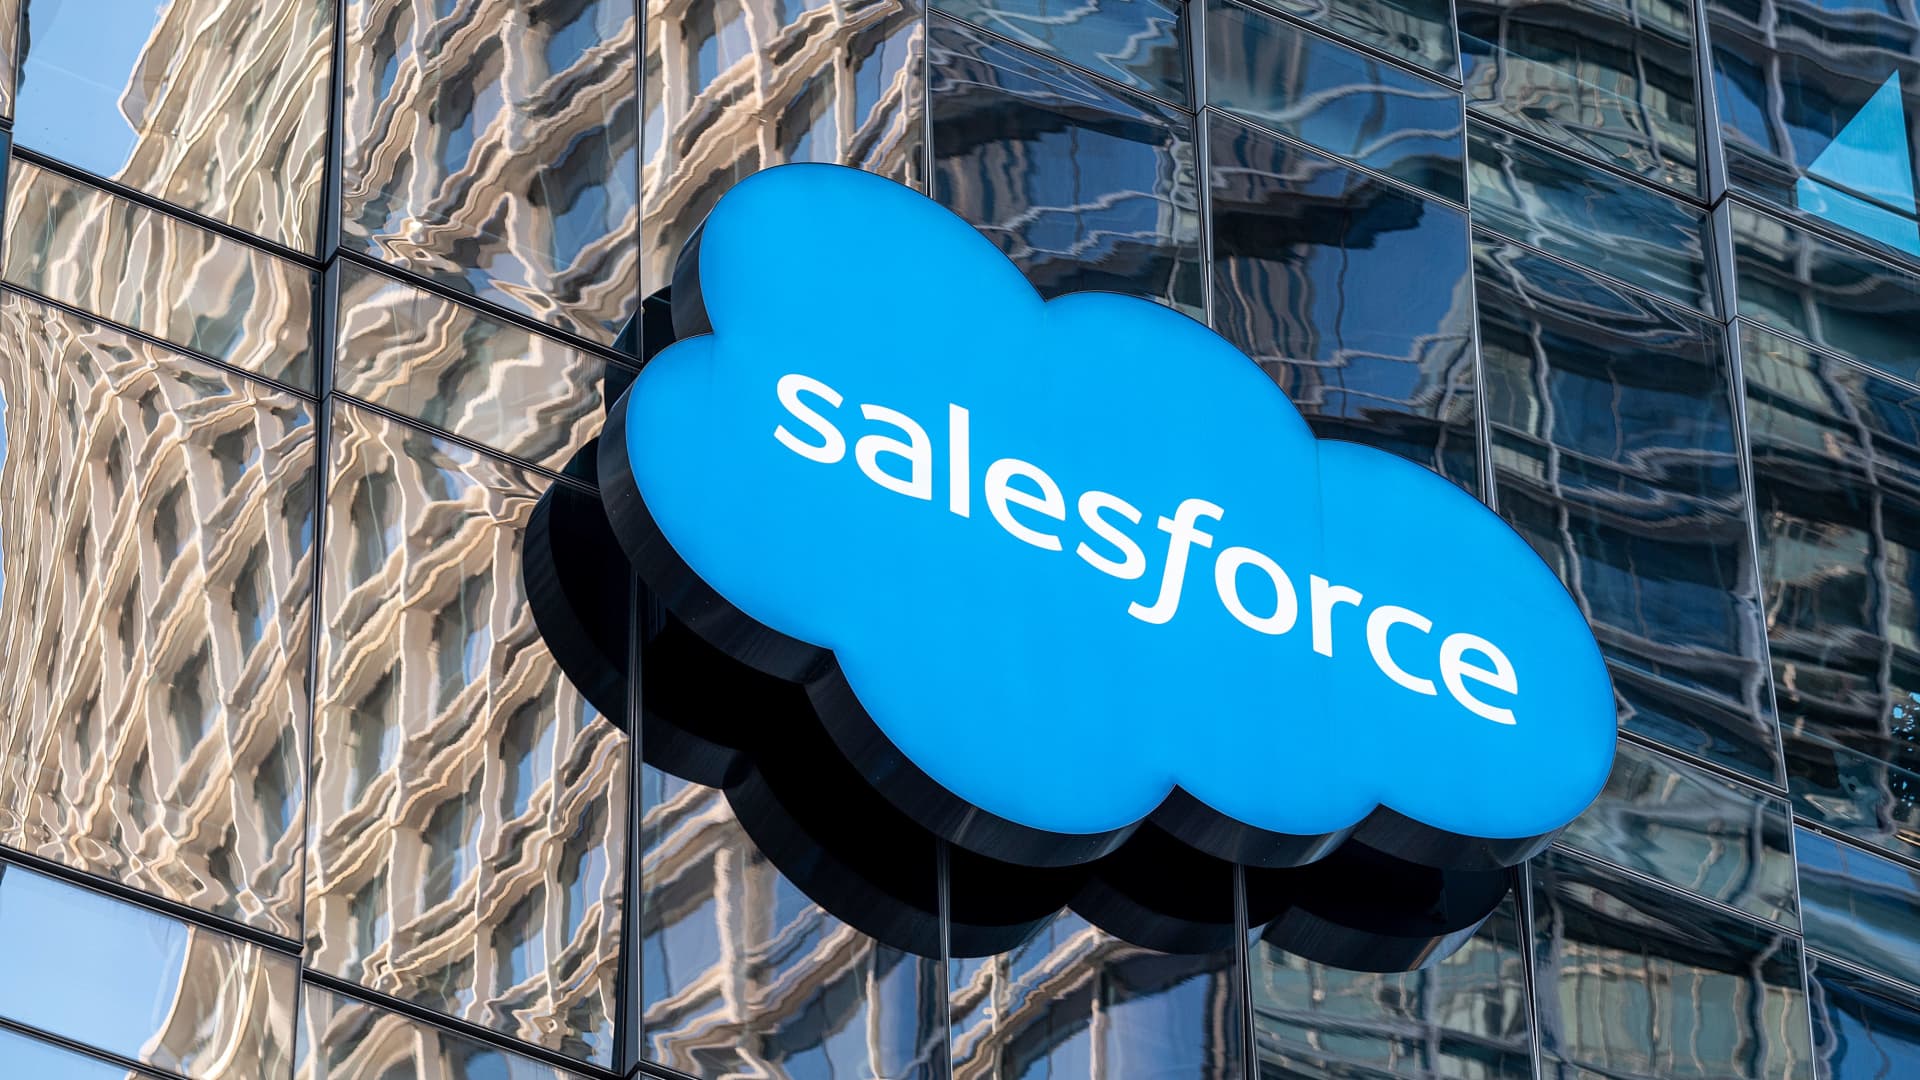 Jeff Ubben’s Inclusive Capital takes stake in Salesforce as more activists target the software giant – CNBC